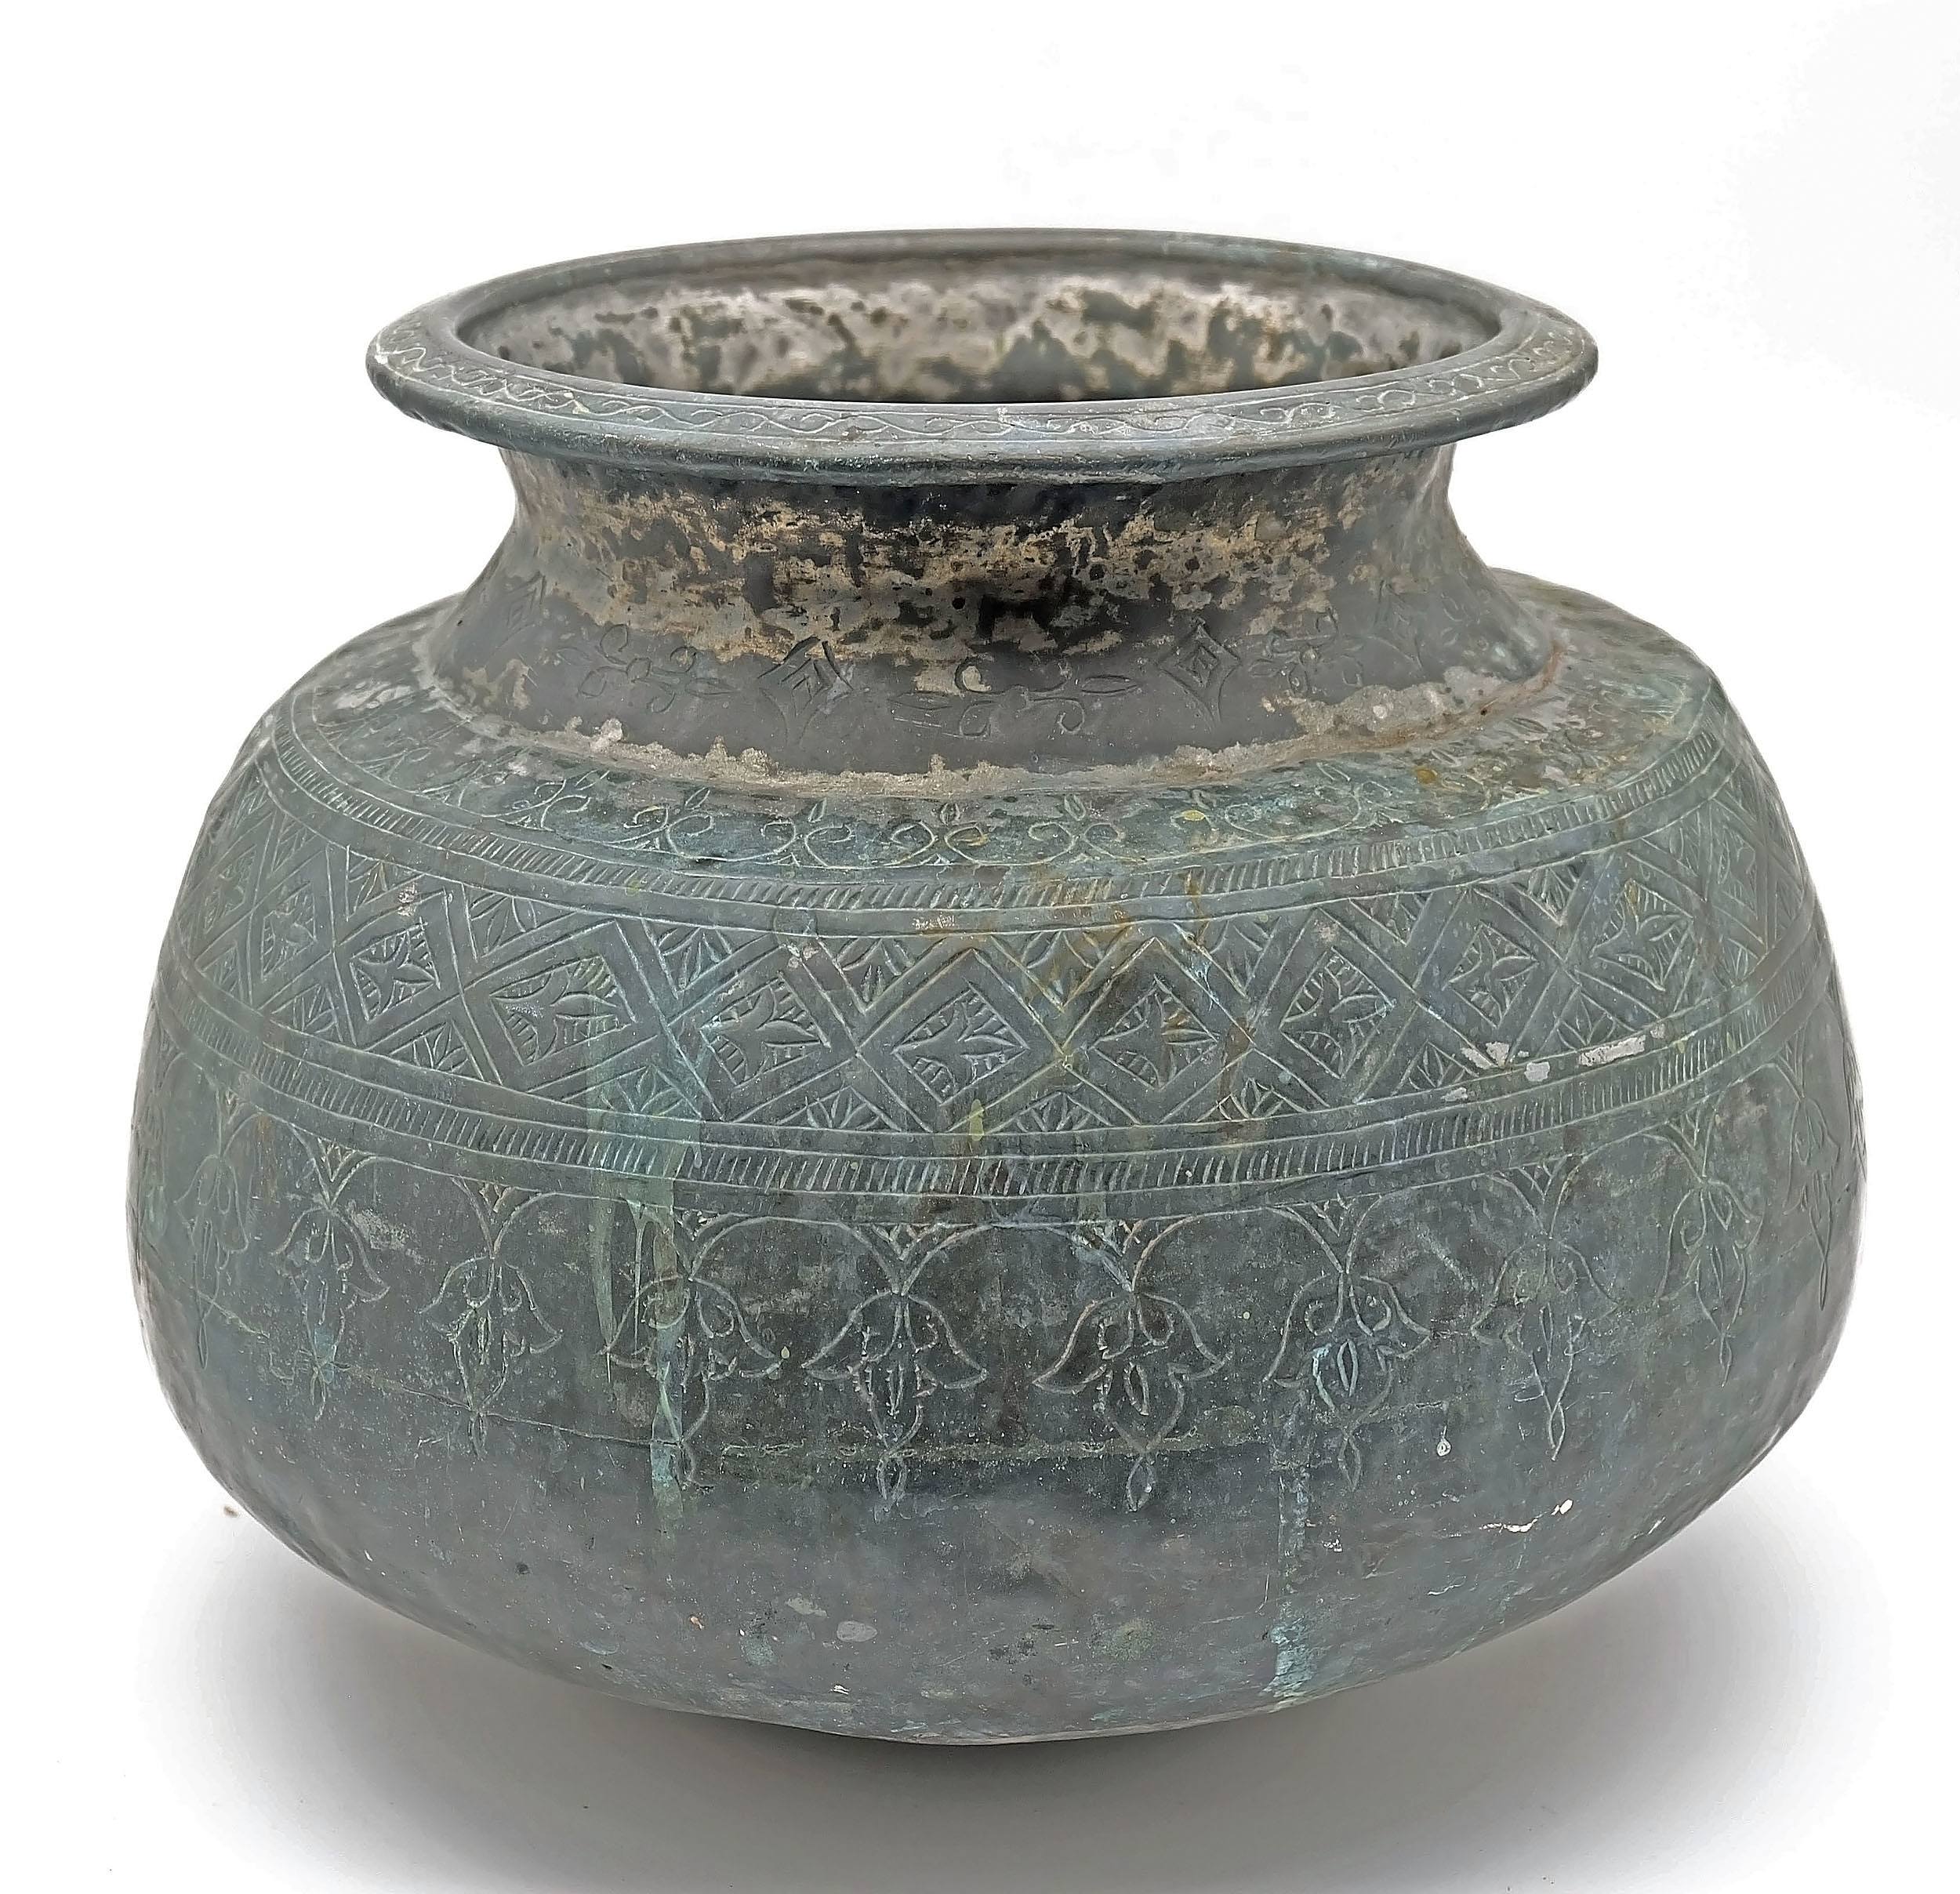 'Antique Indo Persian Tinned Copper Storage Vessel with Engraved Design'